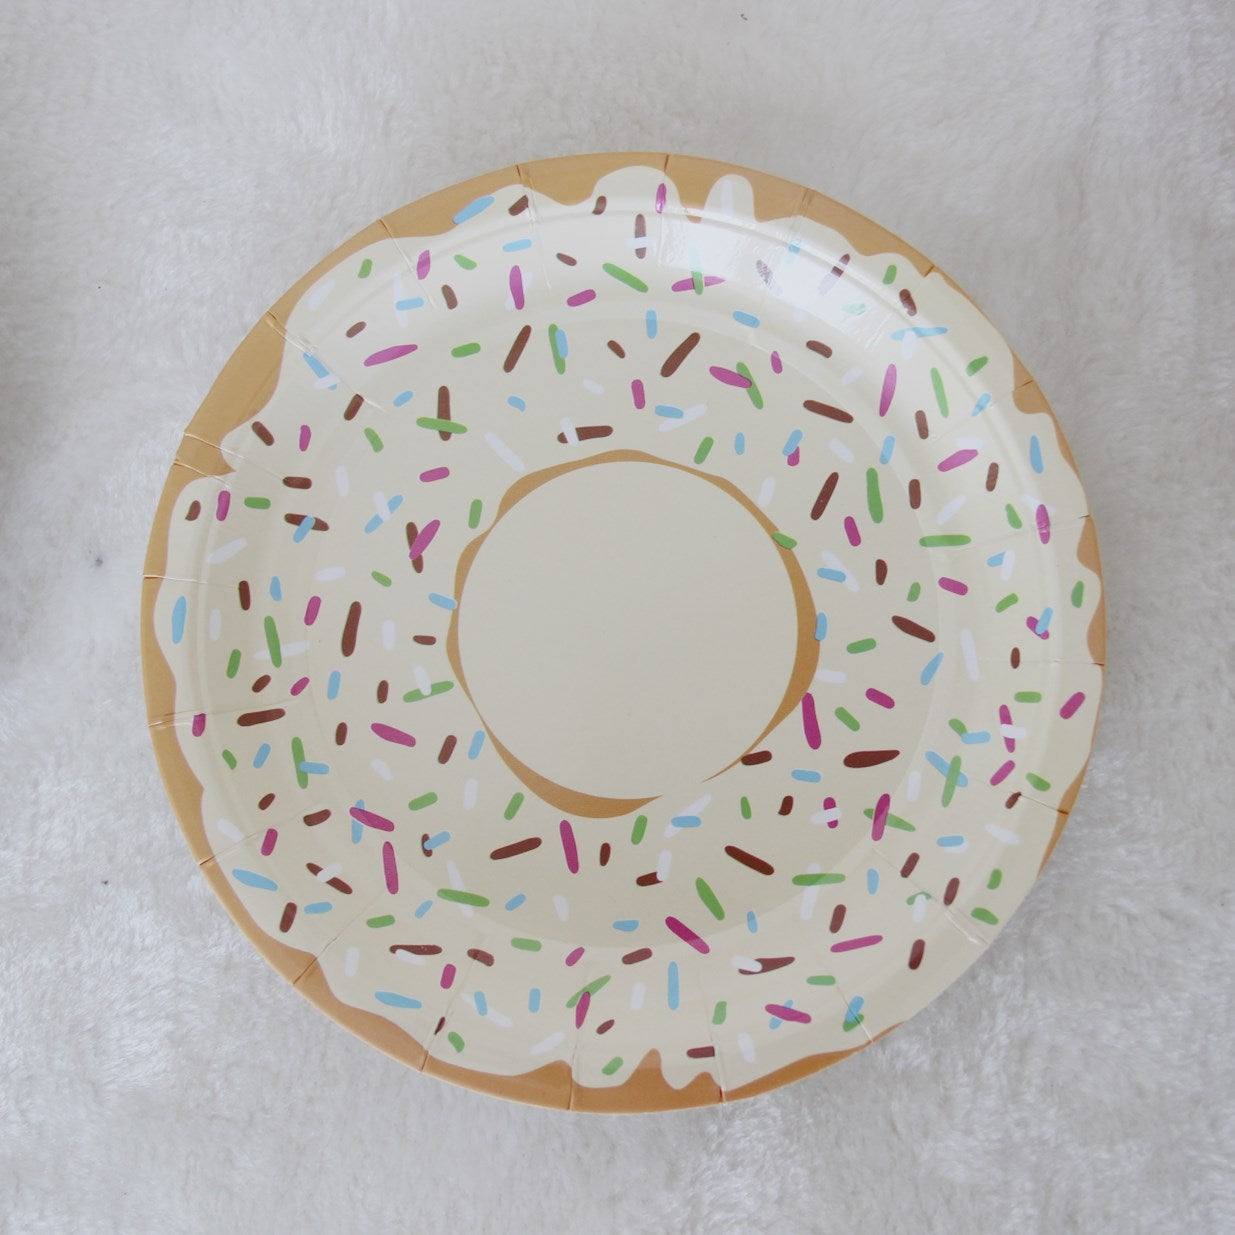 New 40PCs Creative Donut Disposable Paper Tableware Set Wedding Baby Shower Birthday Party Supplies Decoration Paper Plates Cups Napkins